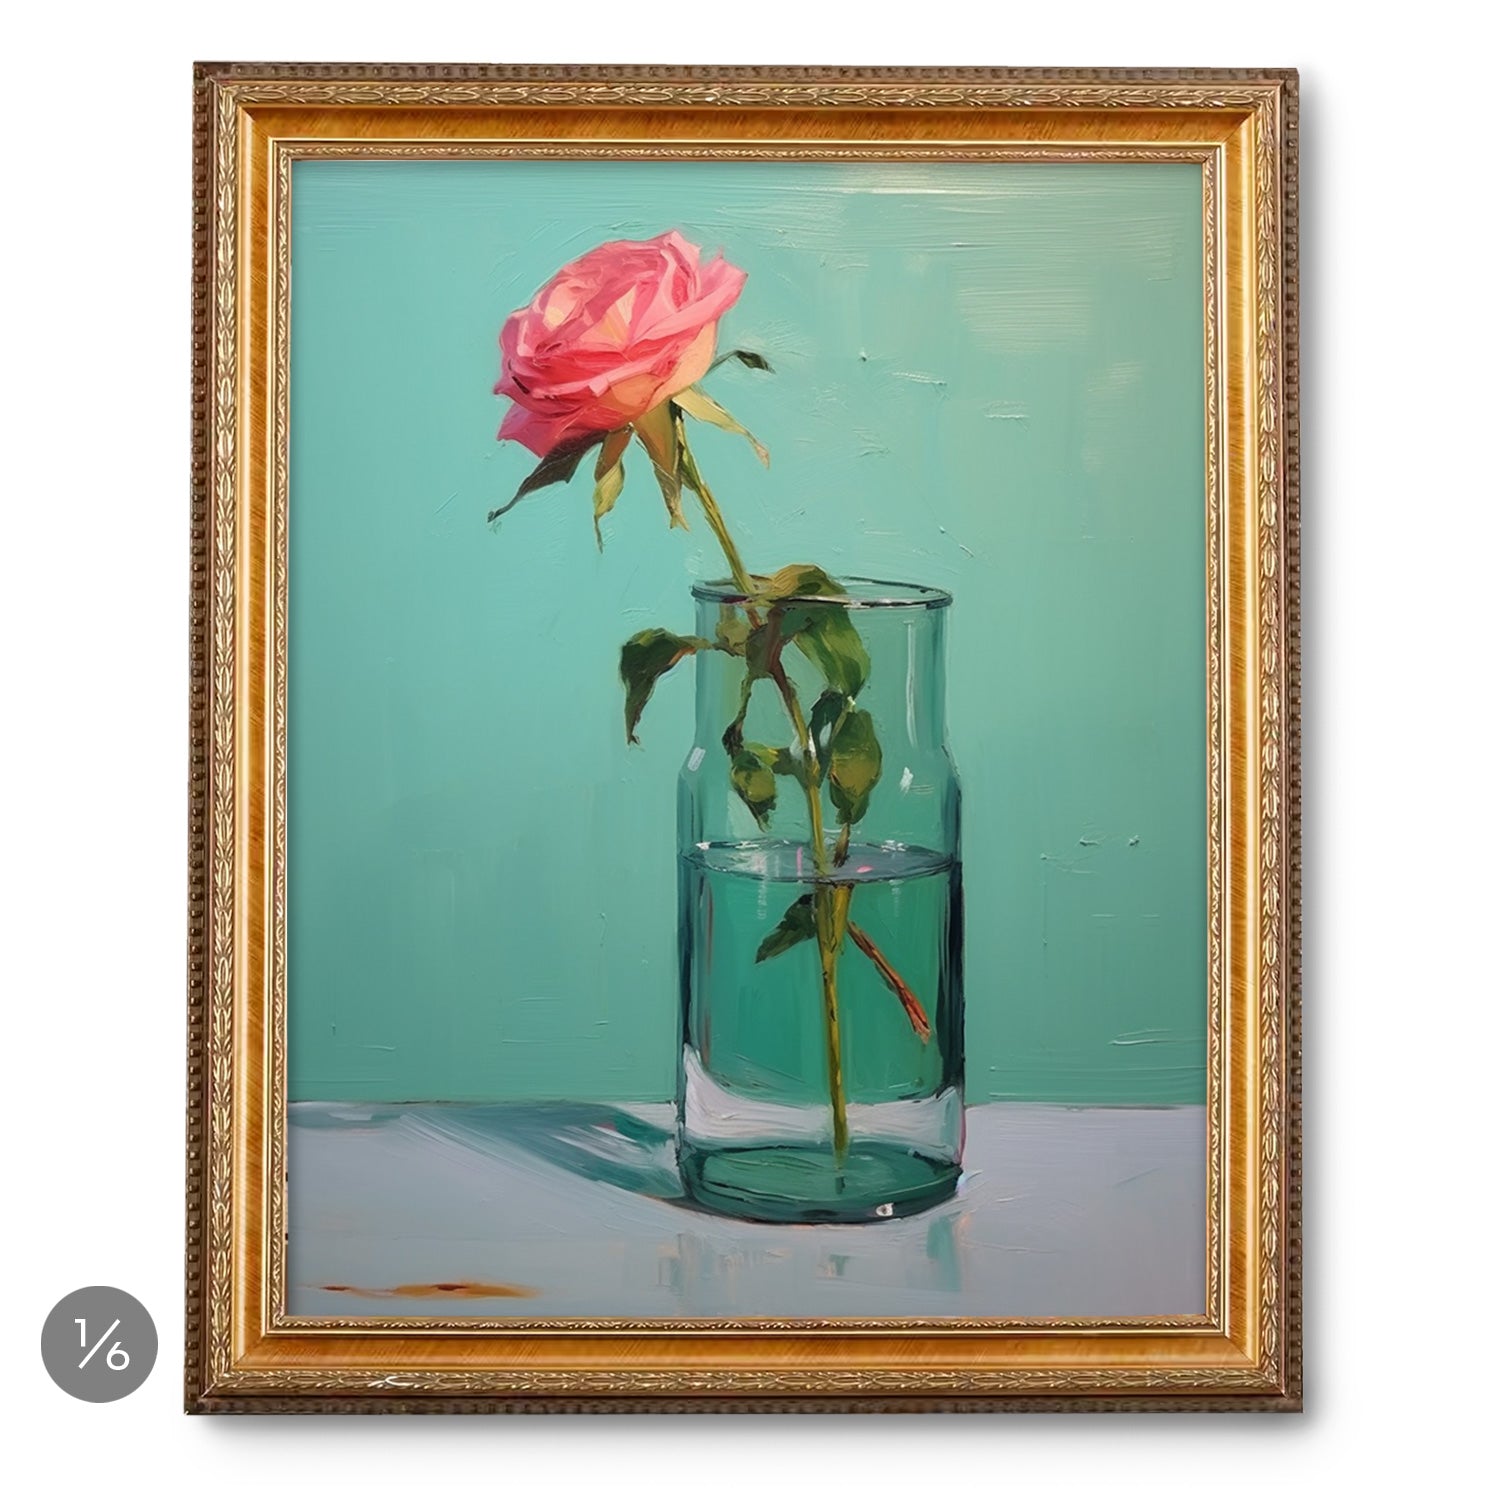 An art piece from Stannie & Lloyd featuring a pink rose in a glass vase, perfect for the Gallery Wall | Sweet Tart | 6 Piece Set.